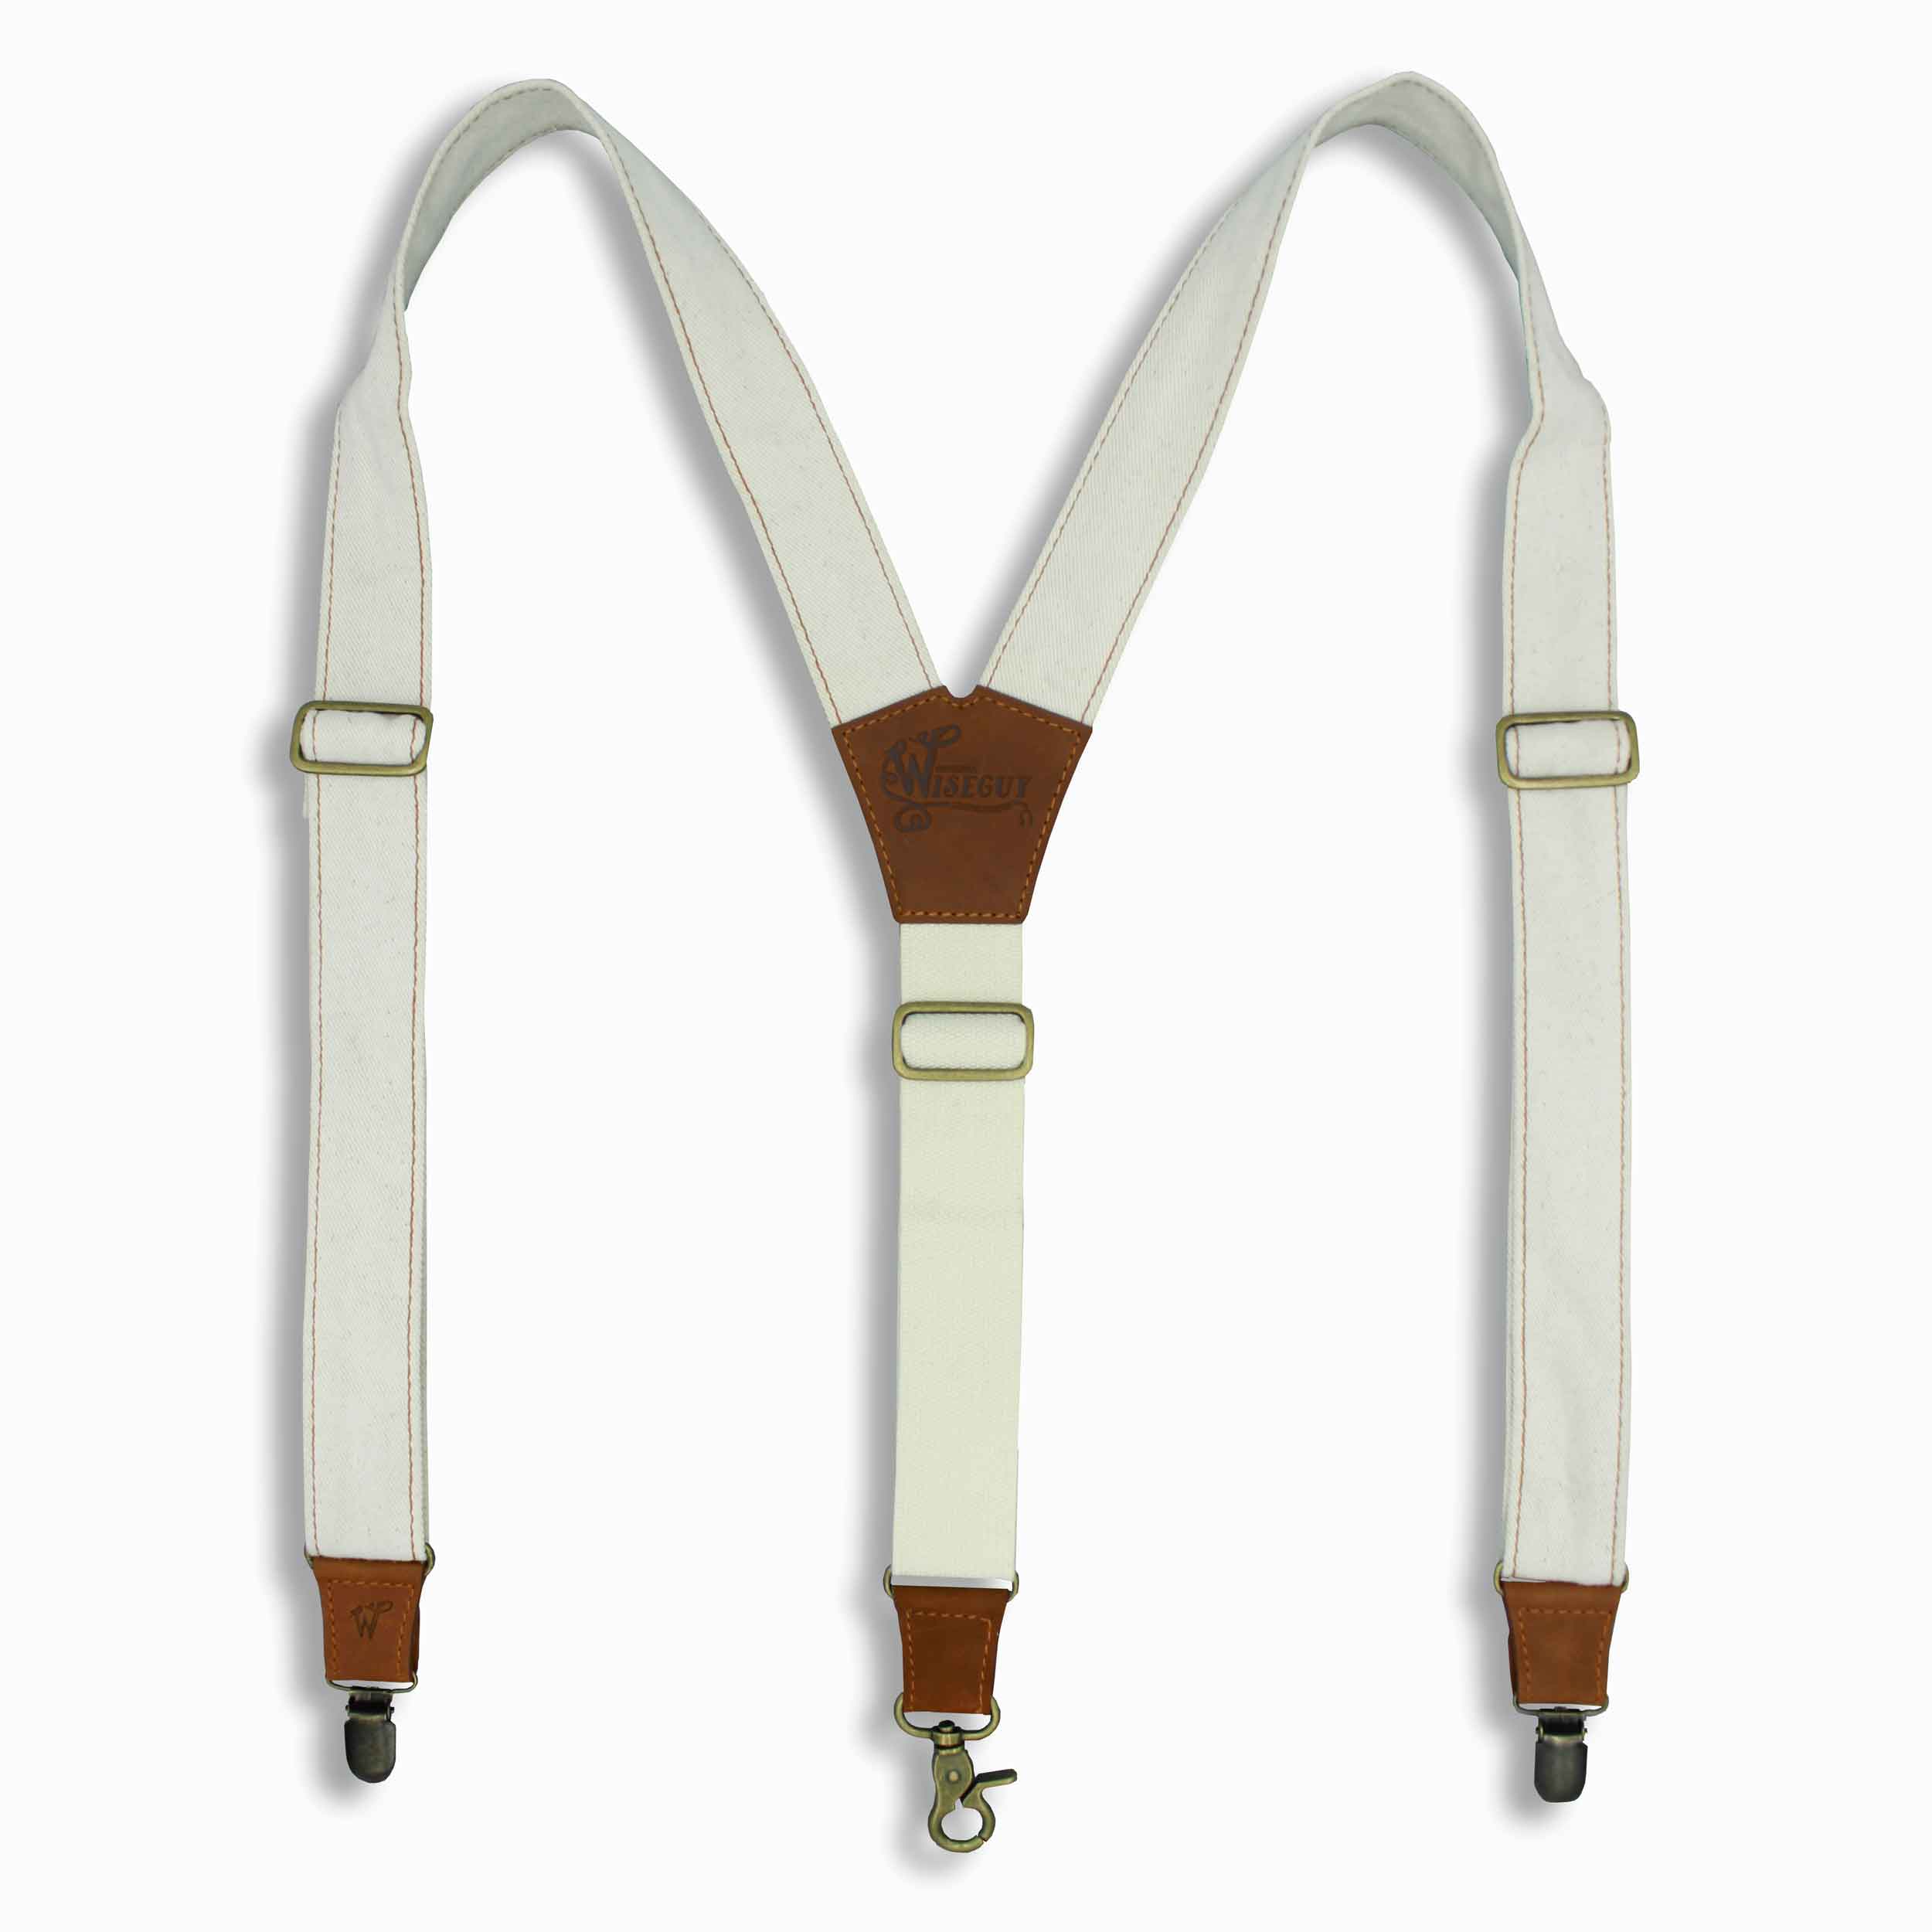 The Duck Ivory Denim Braces with Camel Brown Leather Parts 1.3 inch - Wiseguy Suspenders